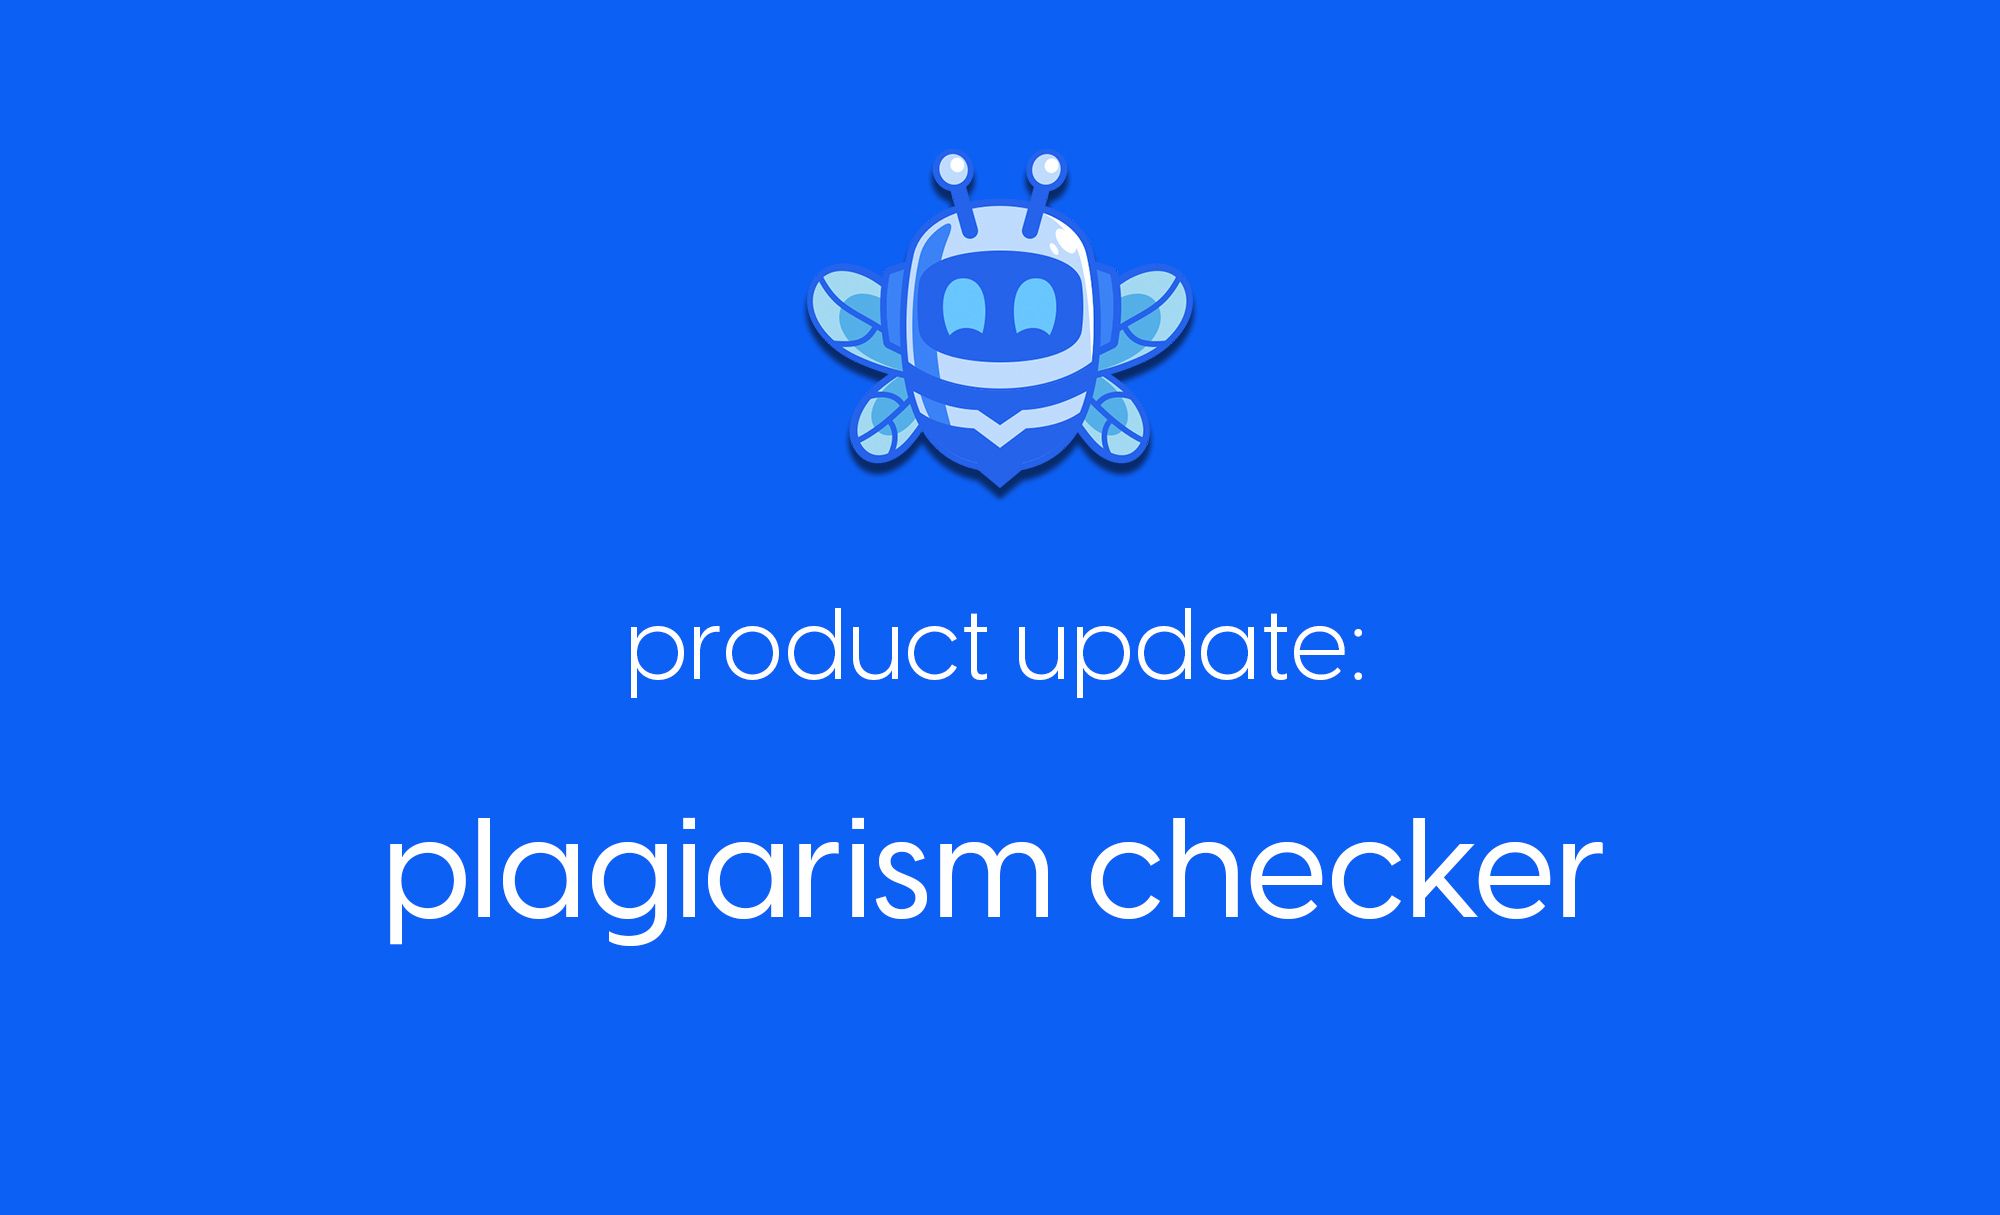 online assignment plagiarism checker project